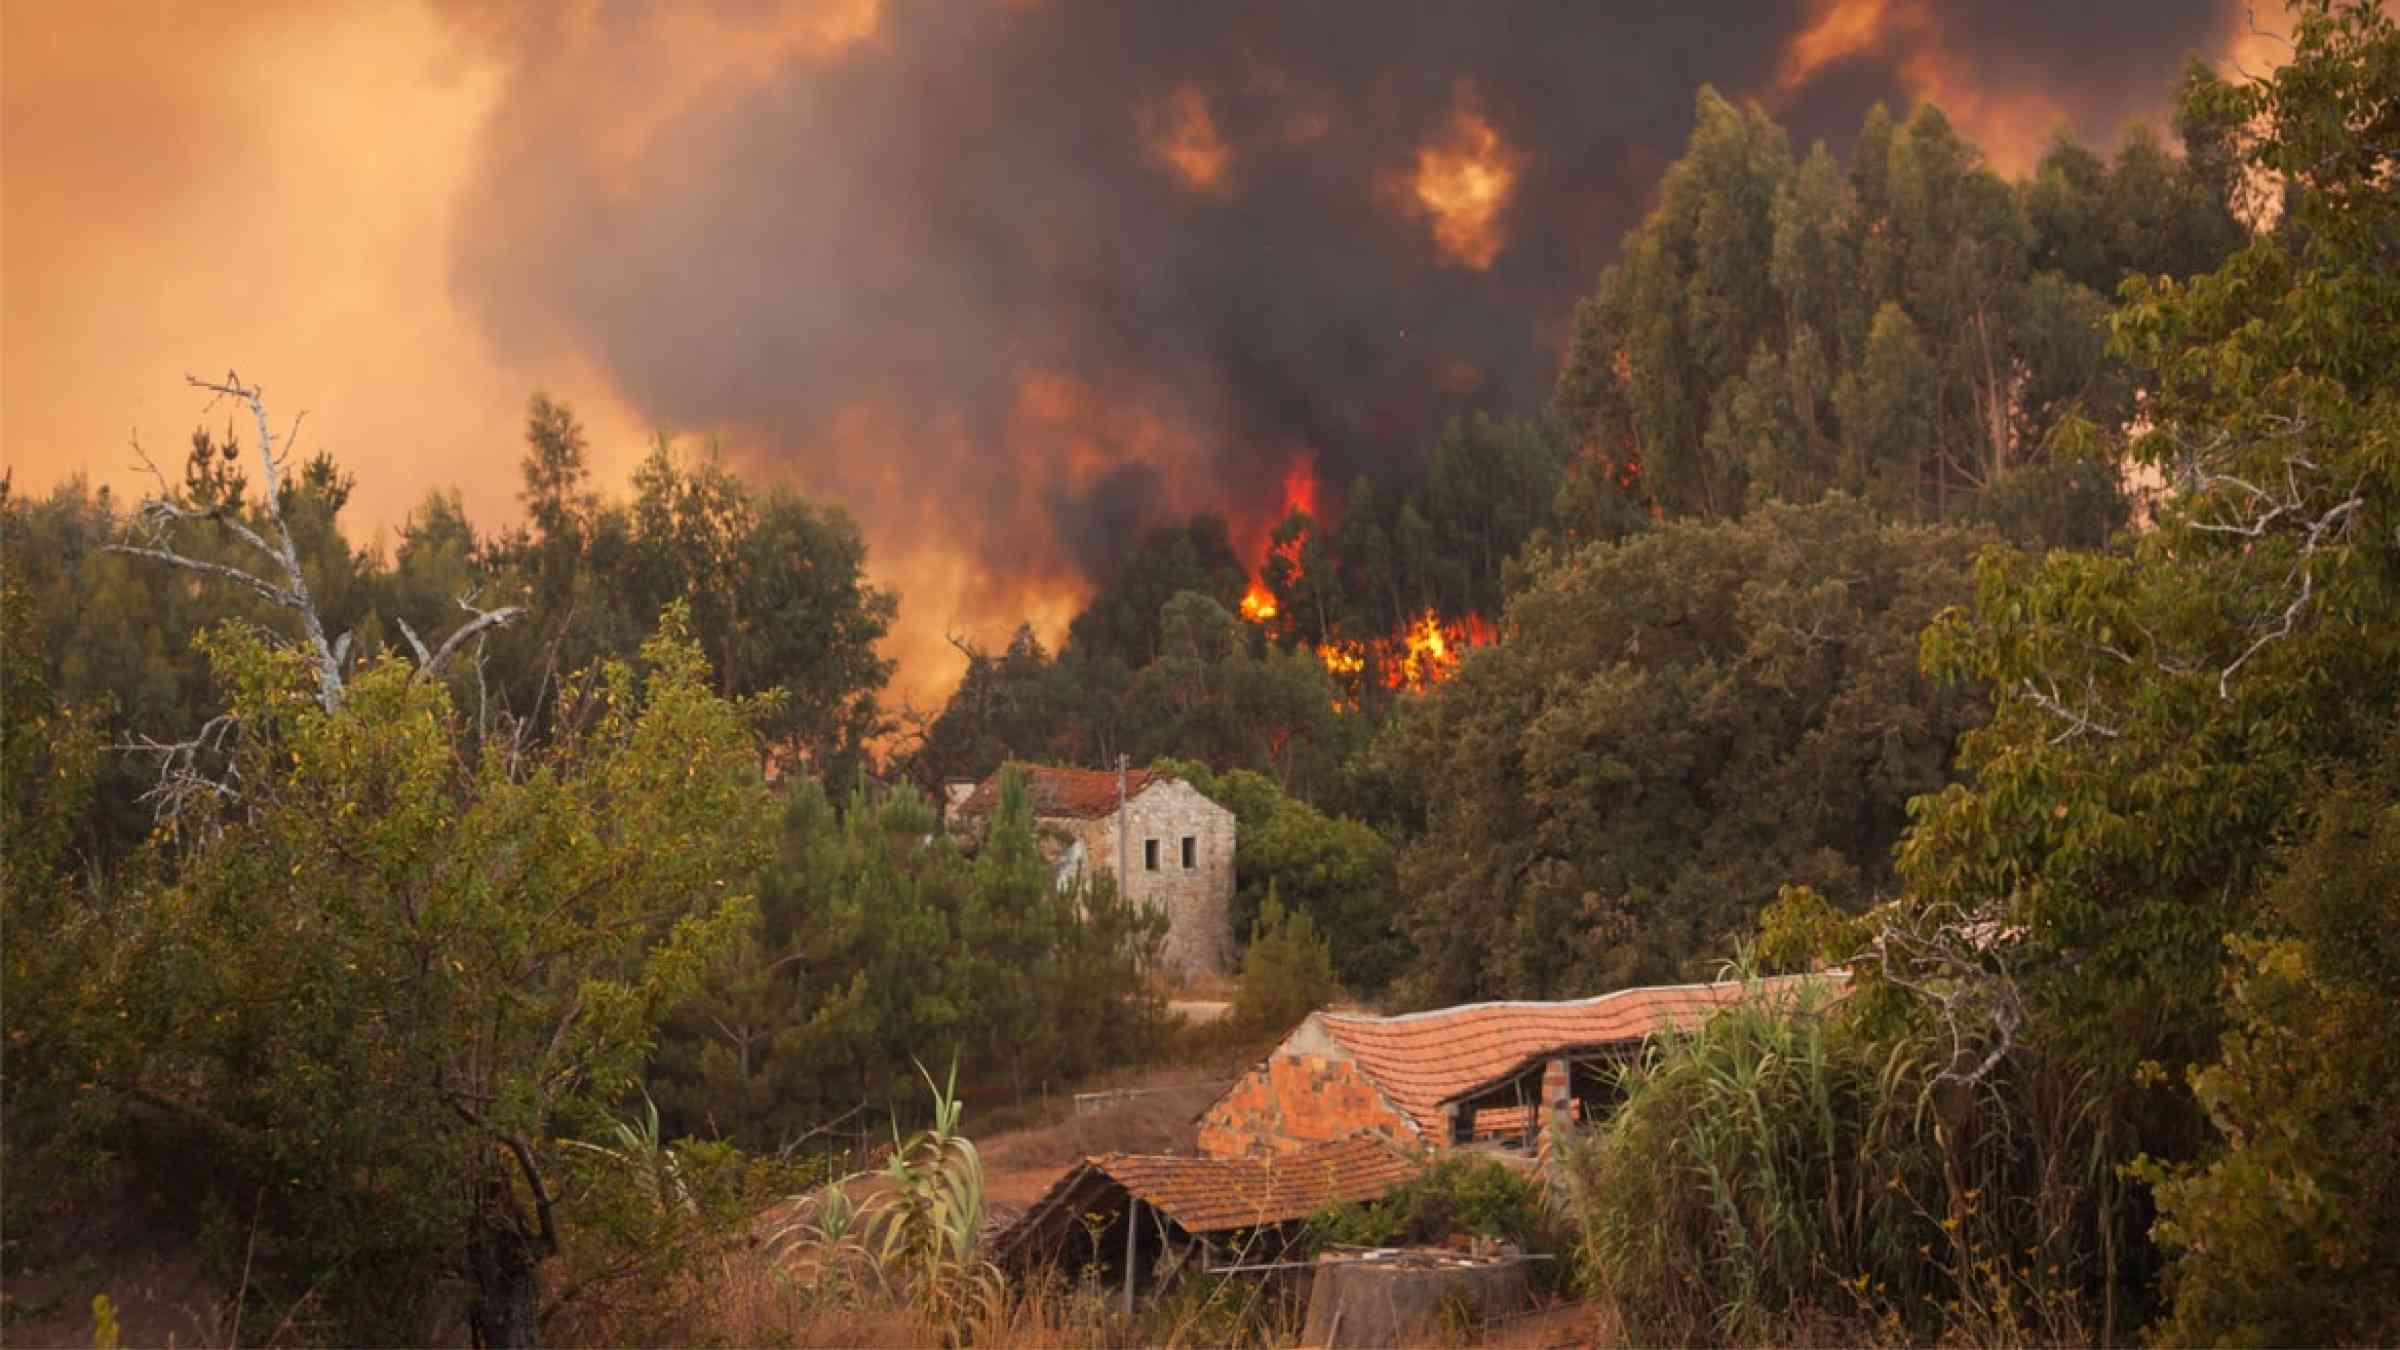 Wildfire threatening houses in Portugal